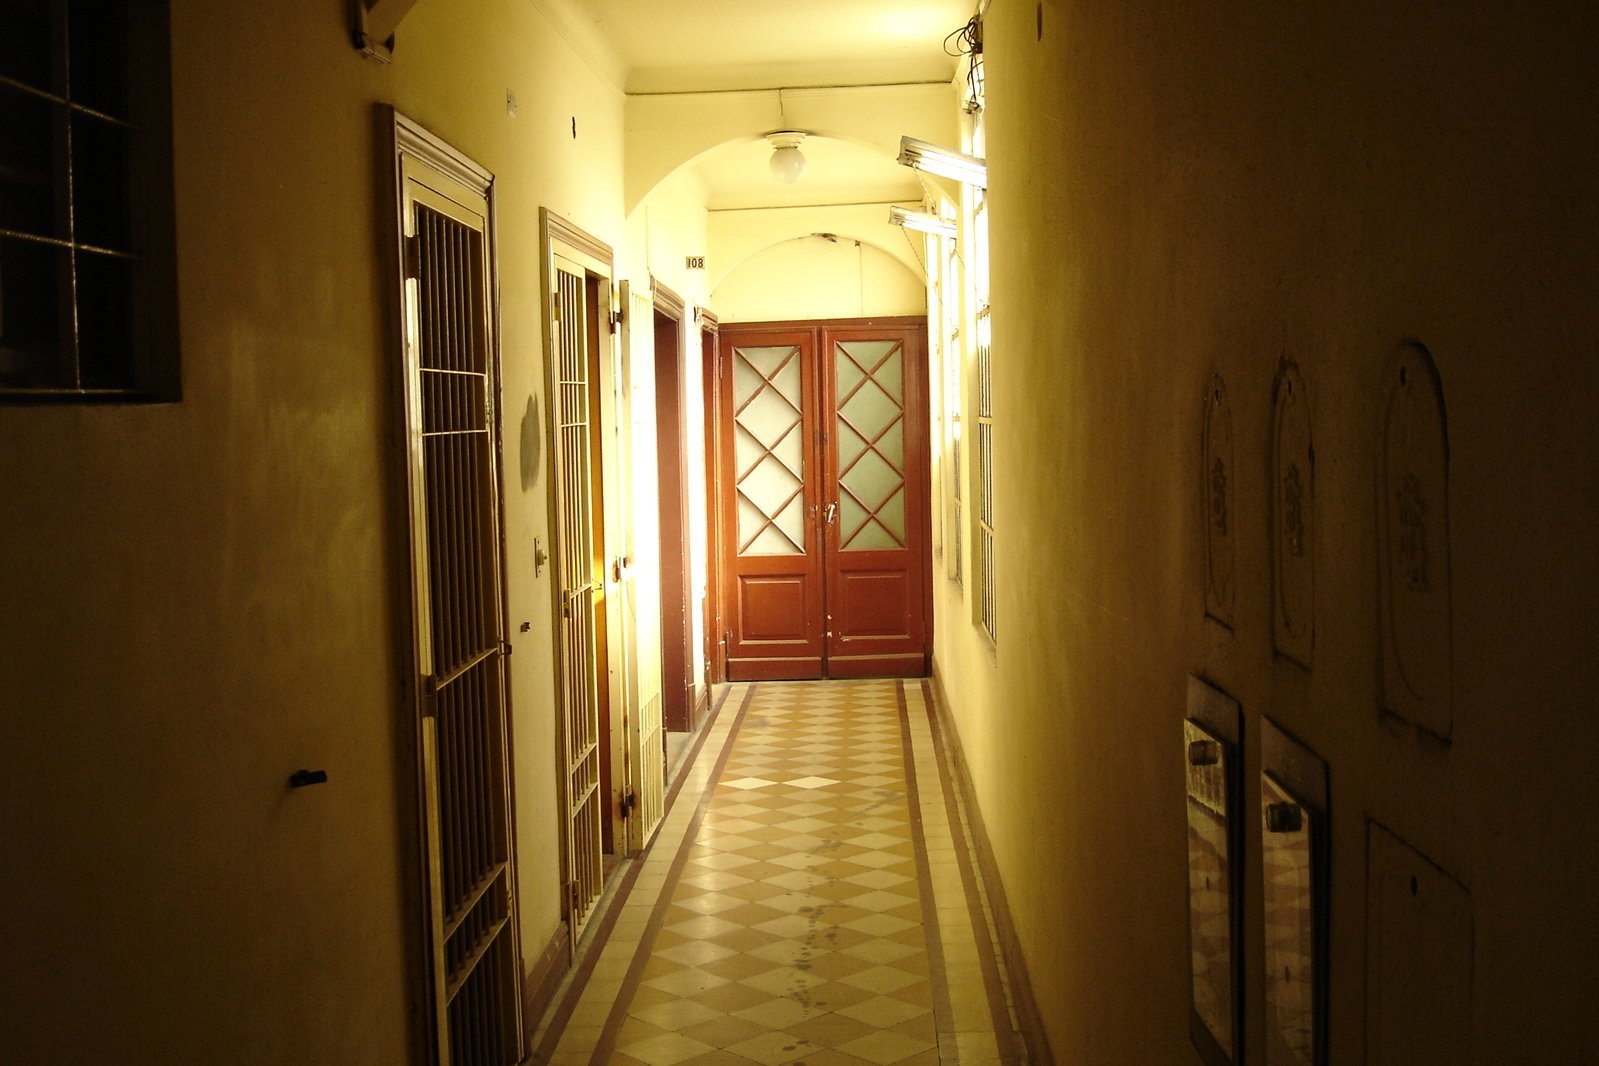 a long hallway with lights, door and windows